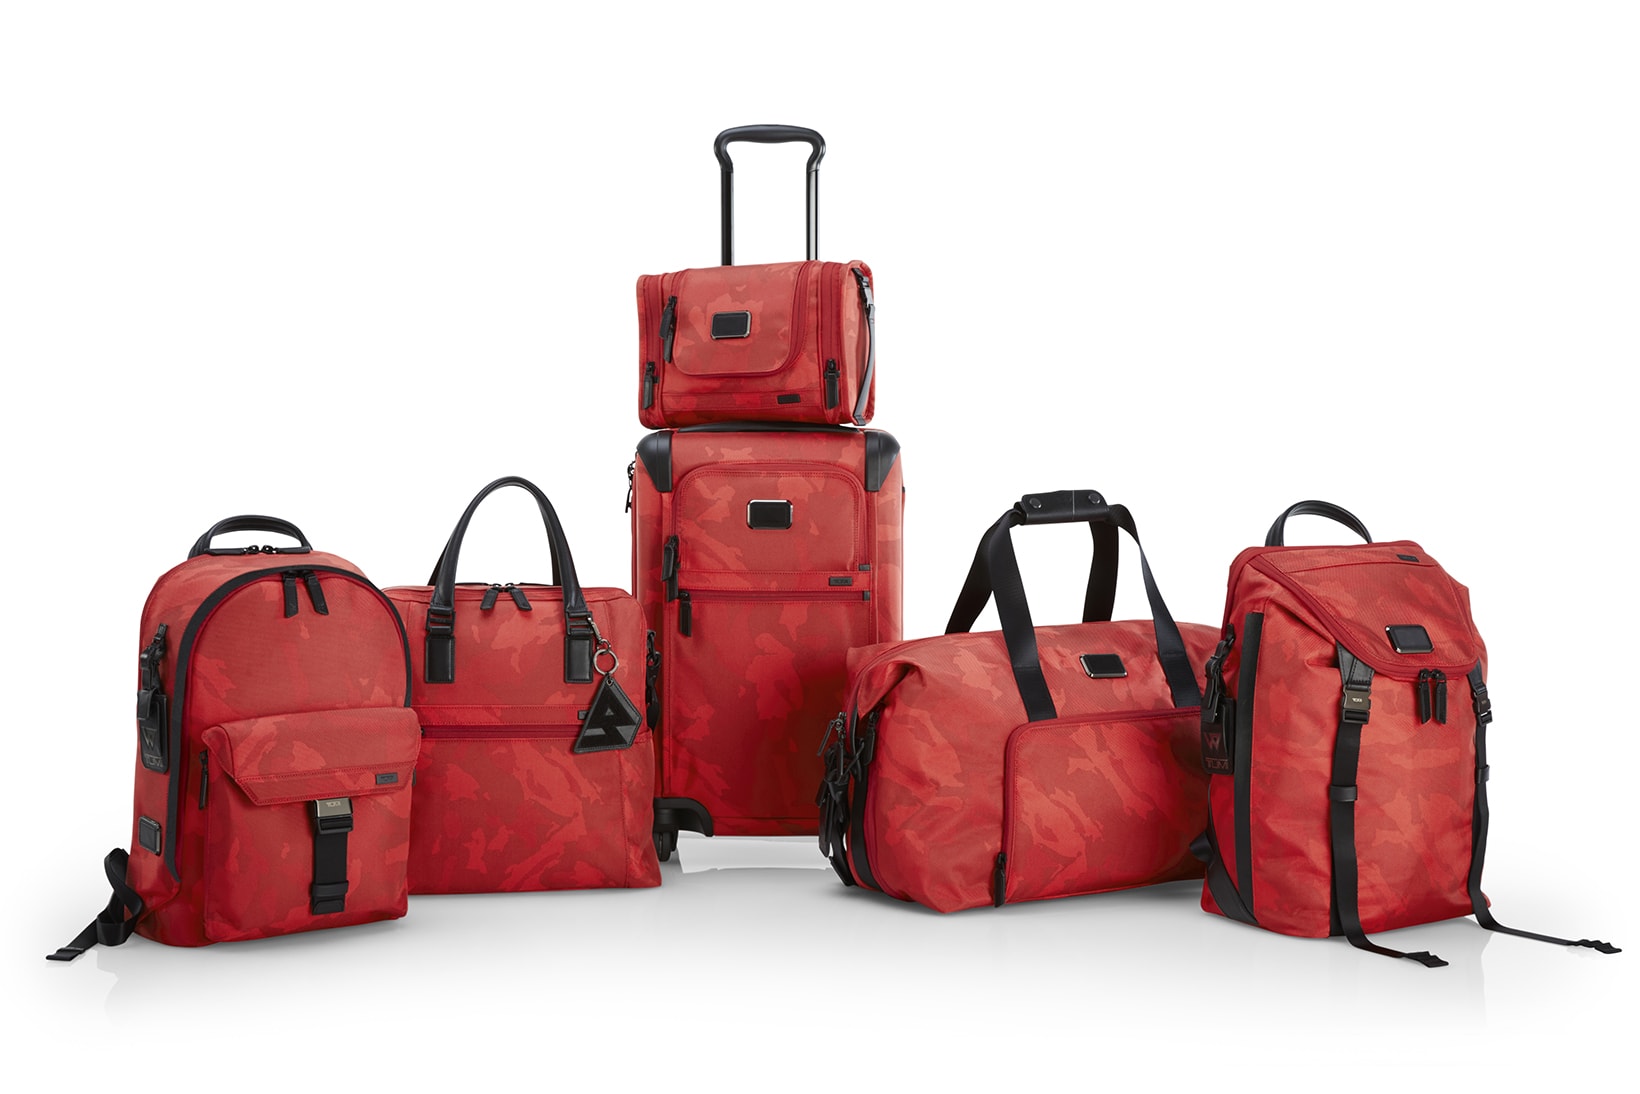 Russell Westbrook TUMI Luggage Collection Suitcases Collaboration